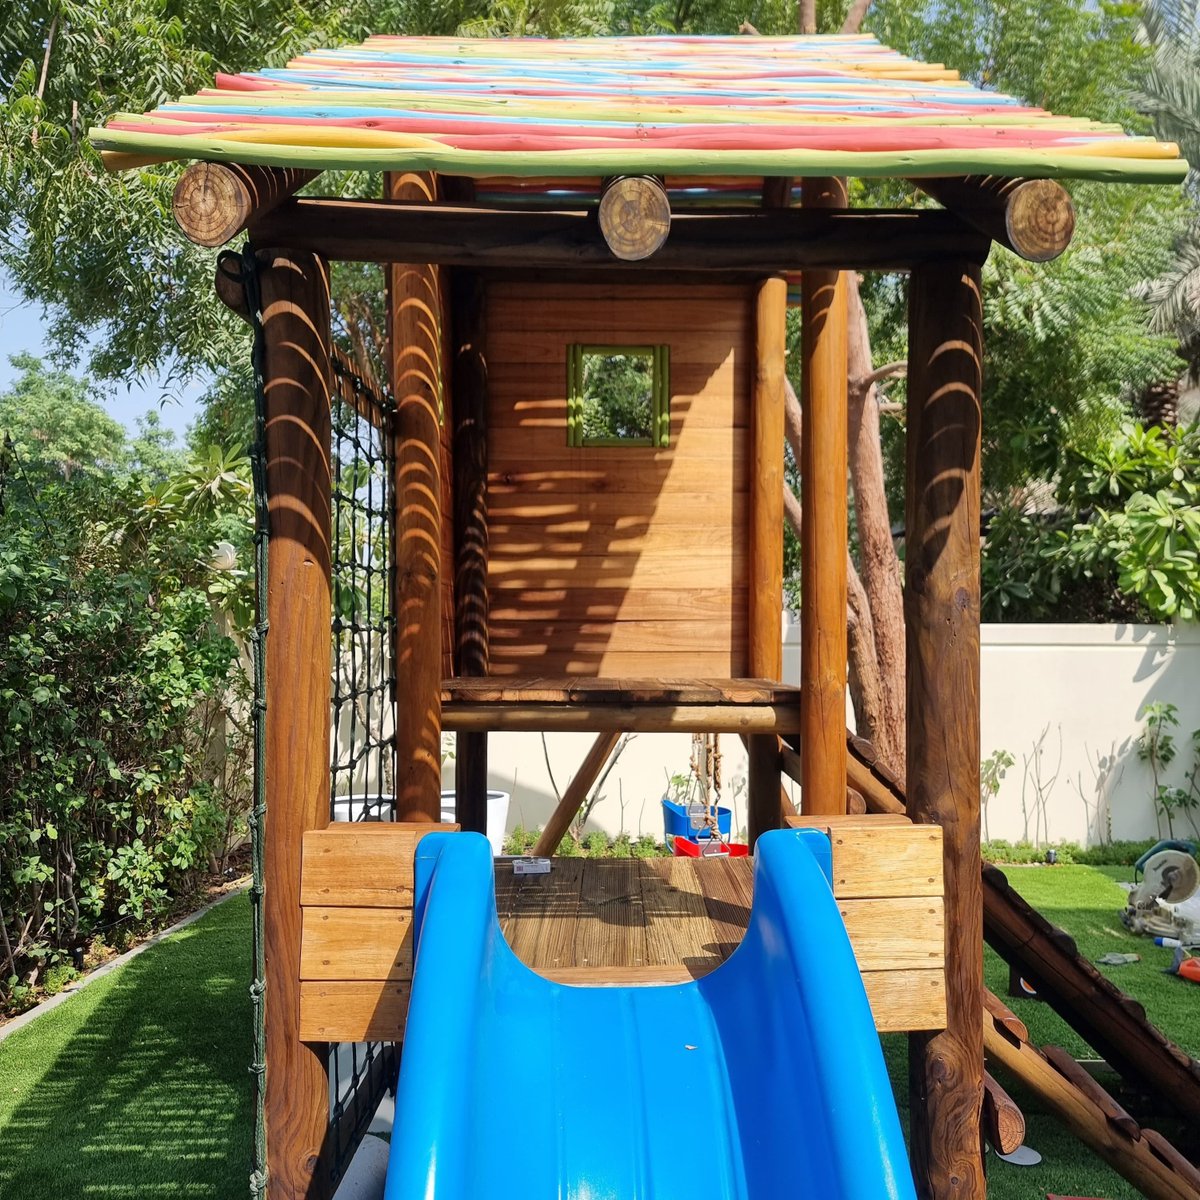 Give your children the adventure of a lifetime with Cape Reed’s pre-designed jungle gyms. Turn playtime into cherished childhood memories. 

👉 Explore the possibilities and shop now! capereed.com/promotion  

#OutdoorLiving #Promo #Playtime